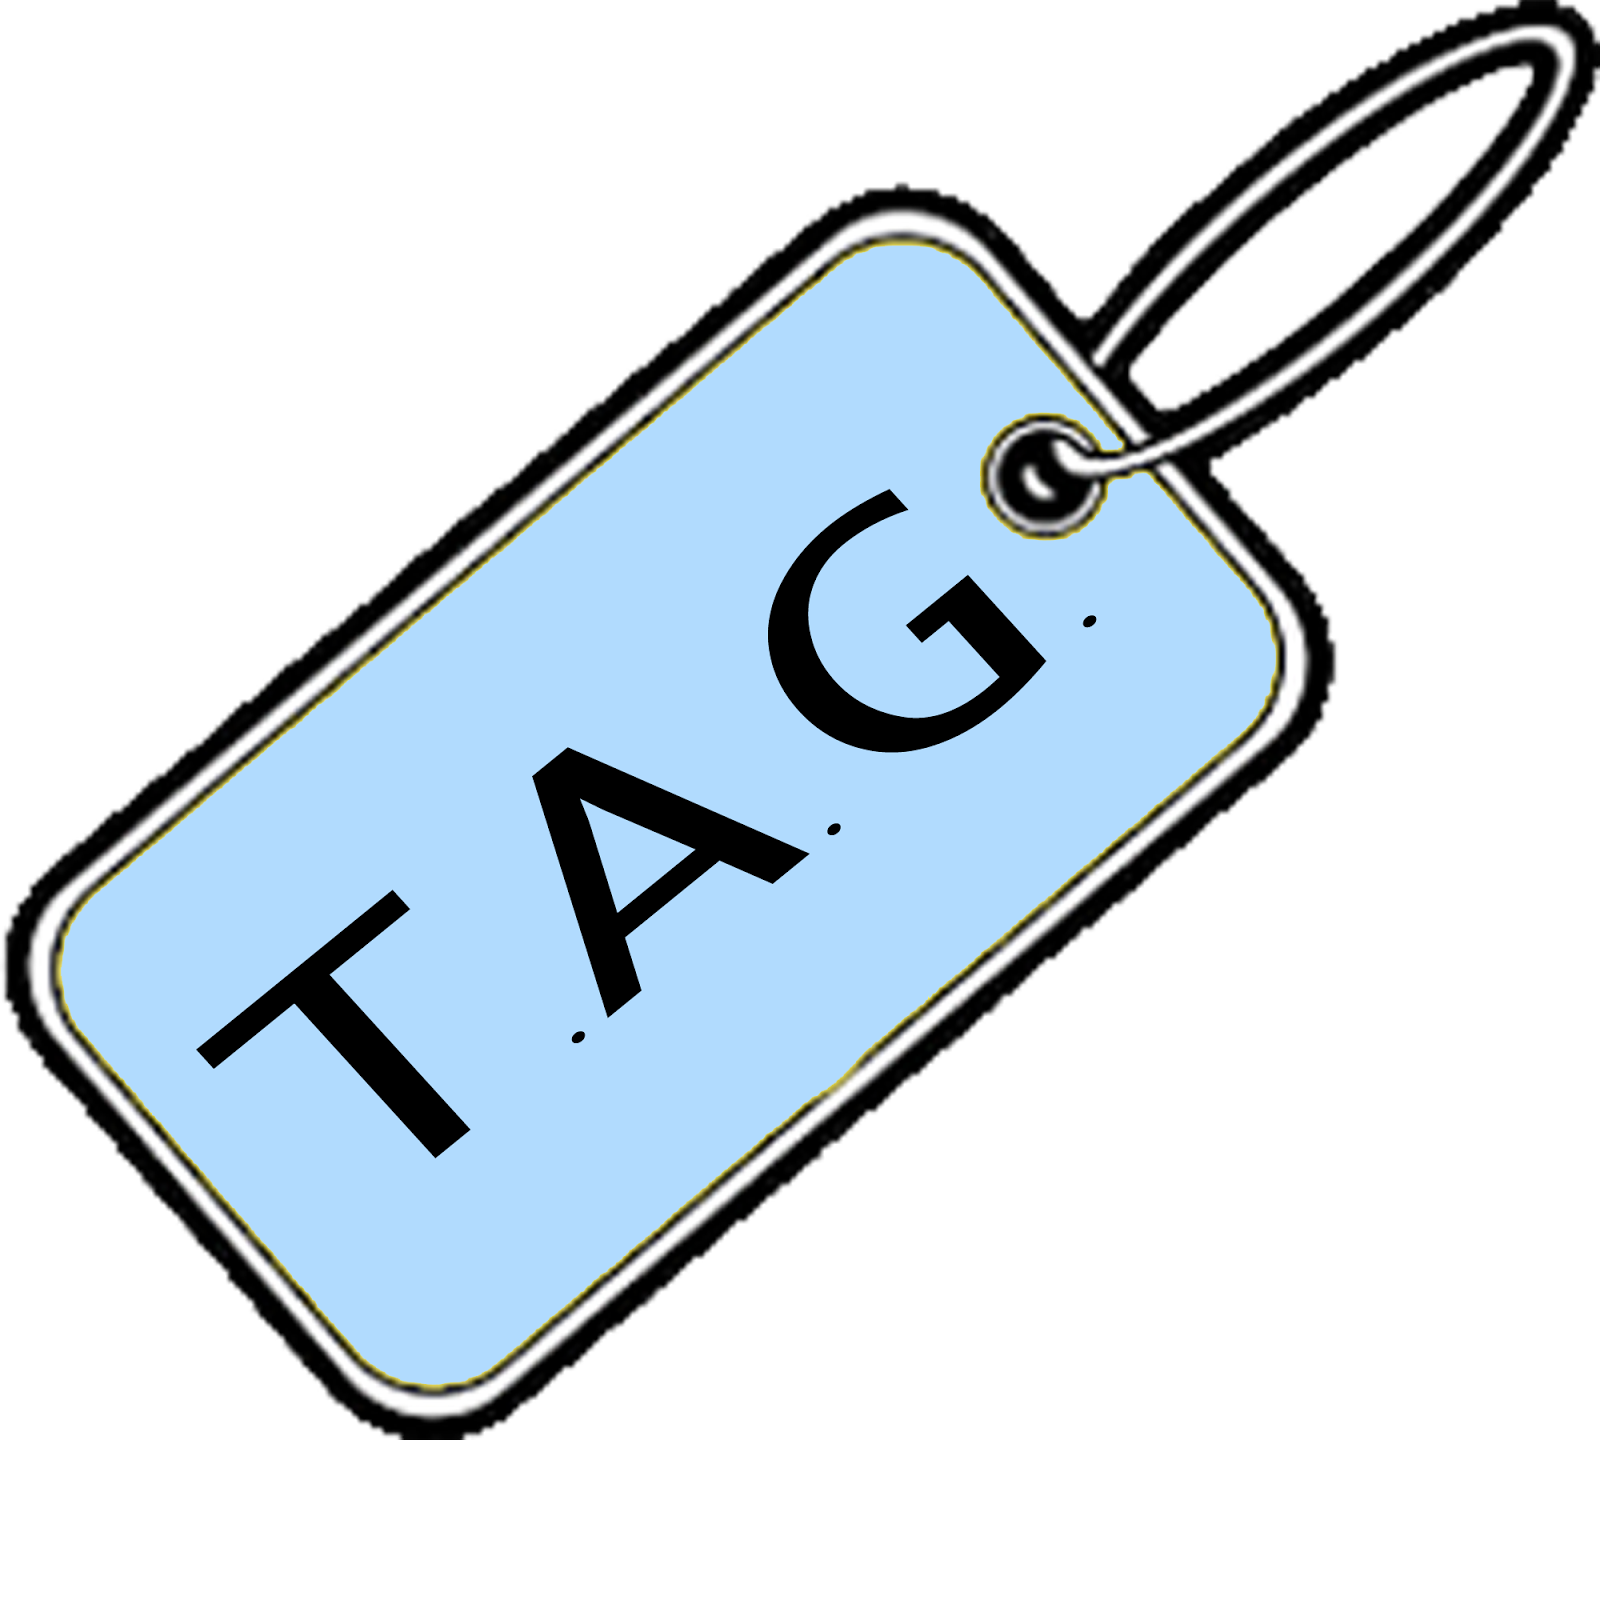 Tag Meaning and Definition